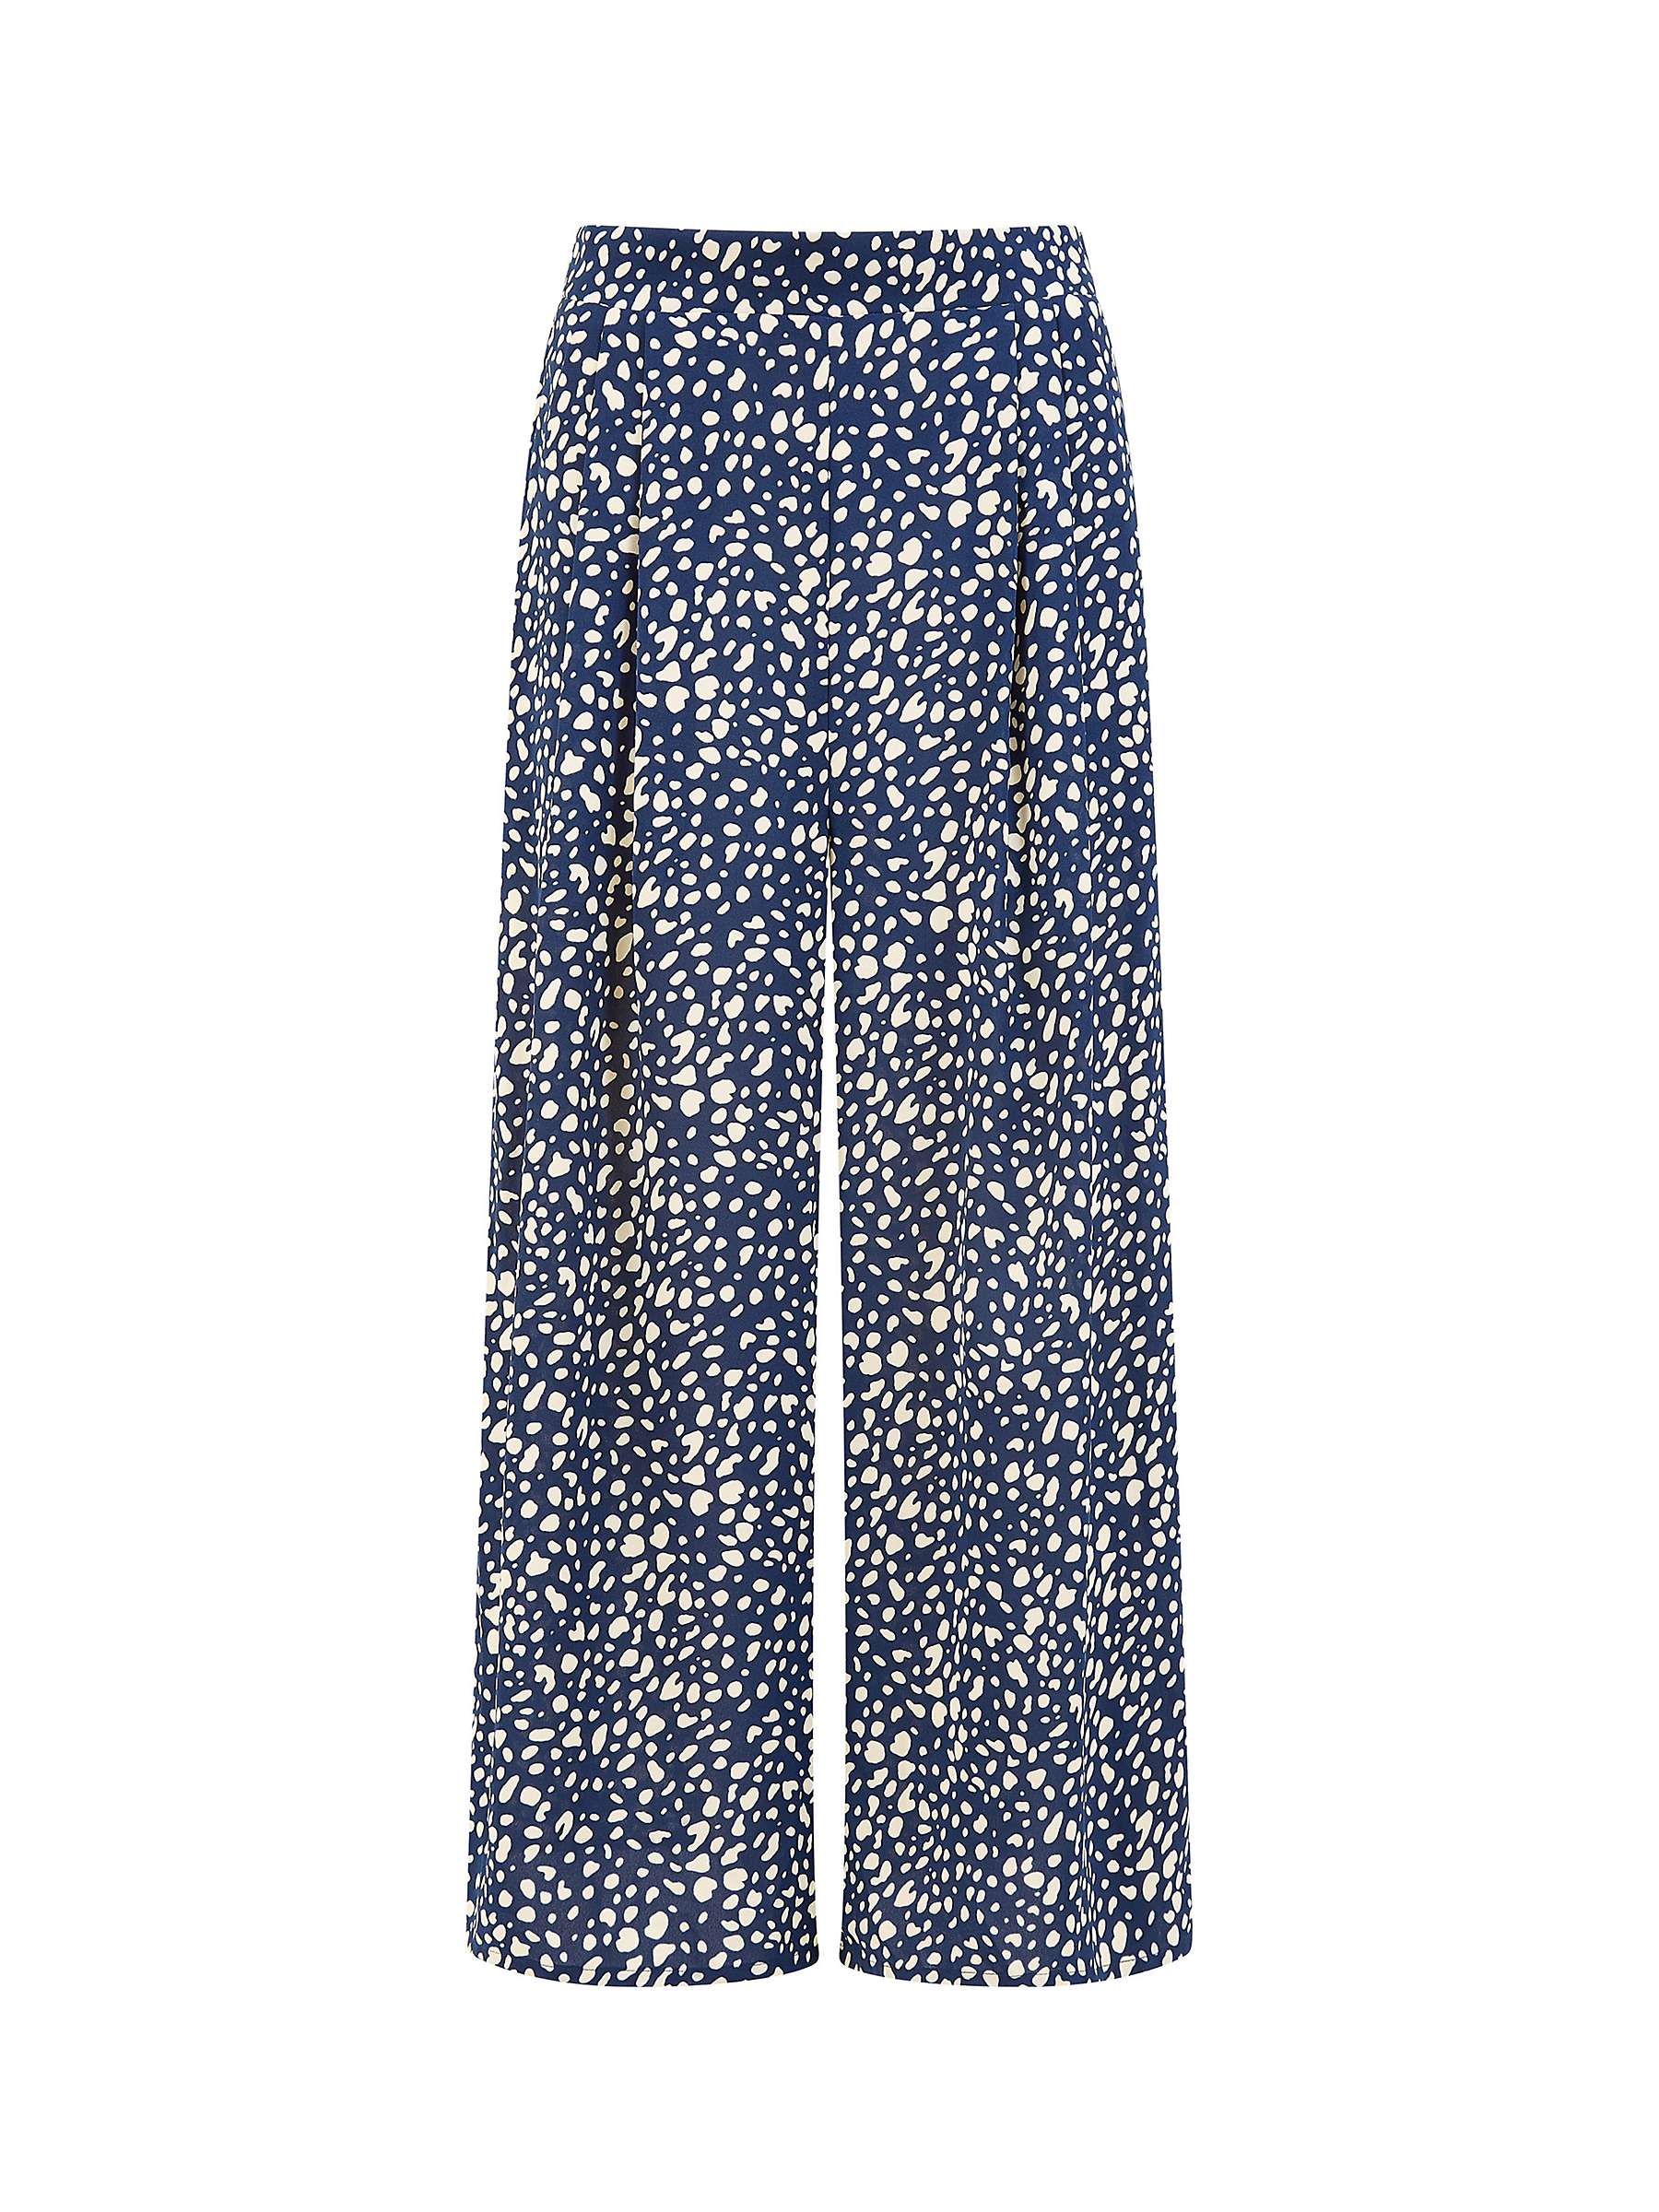 Buy Yumi Dash Print Culotte Trousers, Navy Online at johnlewis.com